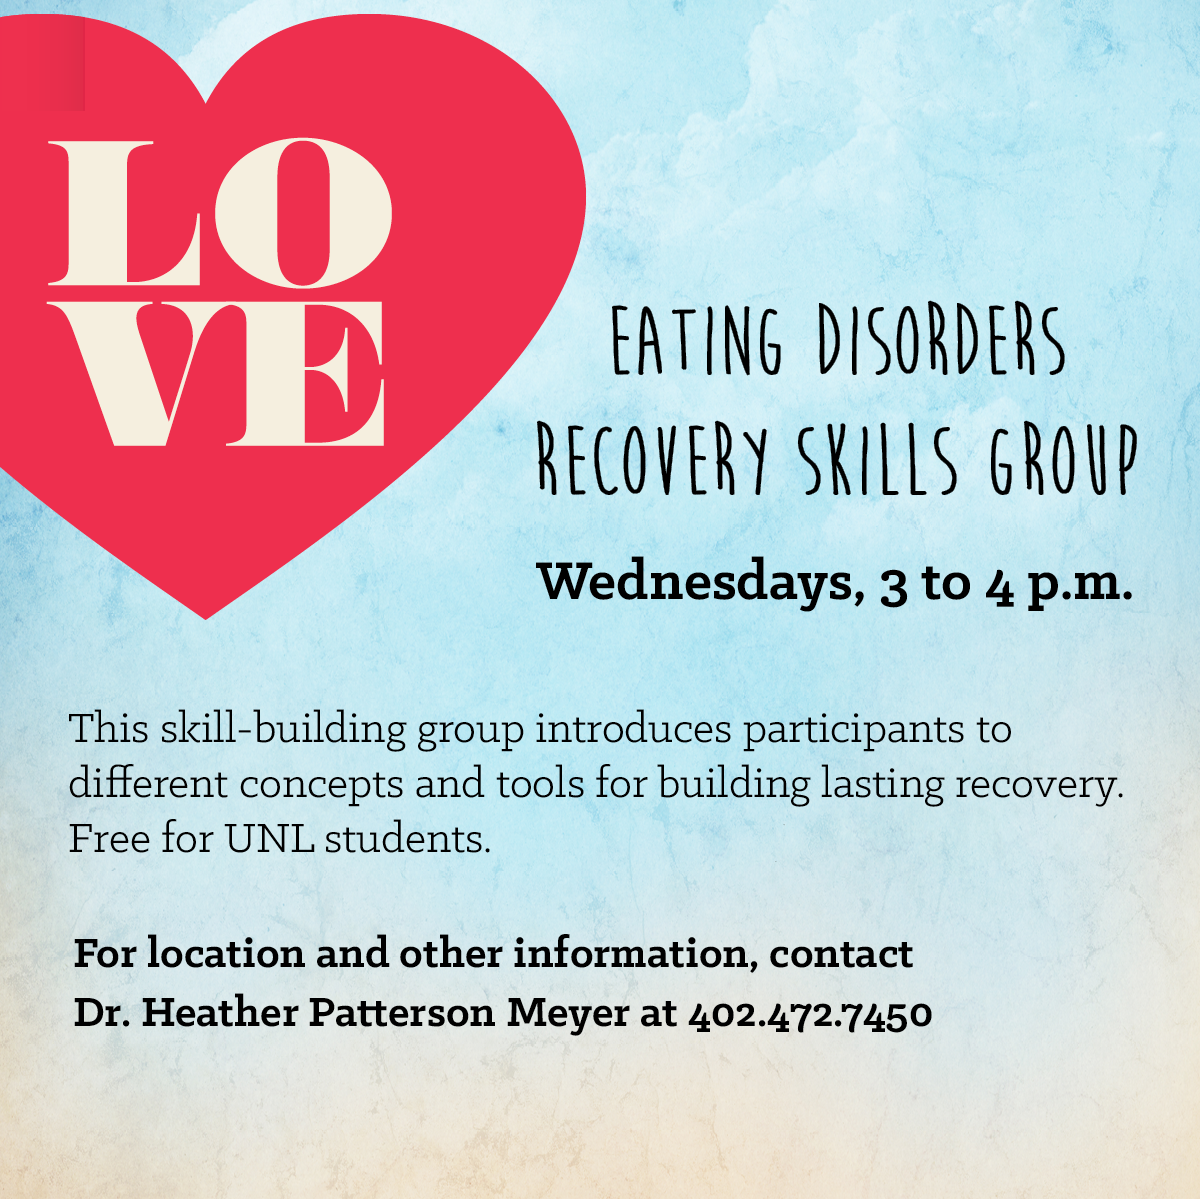 Eating Disorders Recovery Skills Group meets Wednesdays from 3 to 4 p.m.